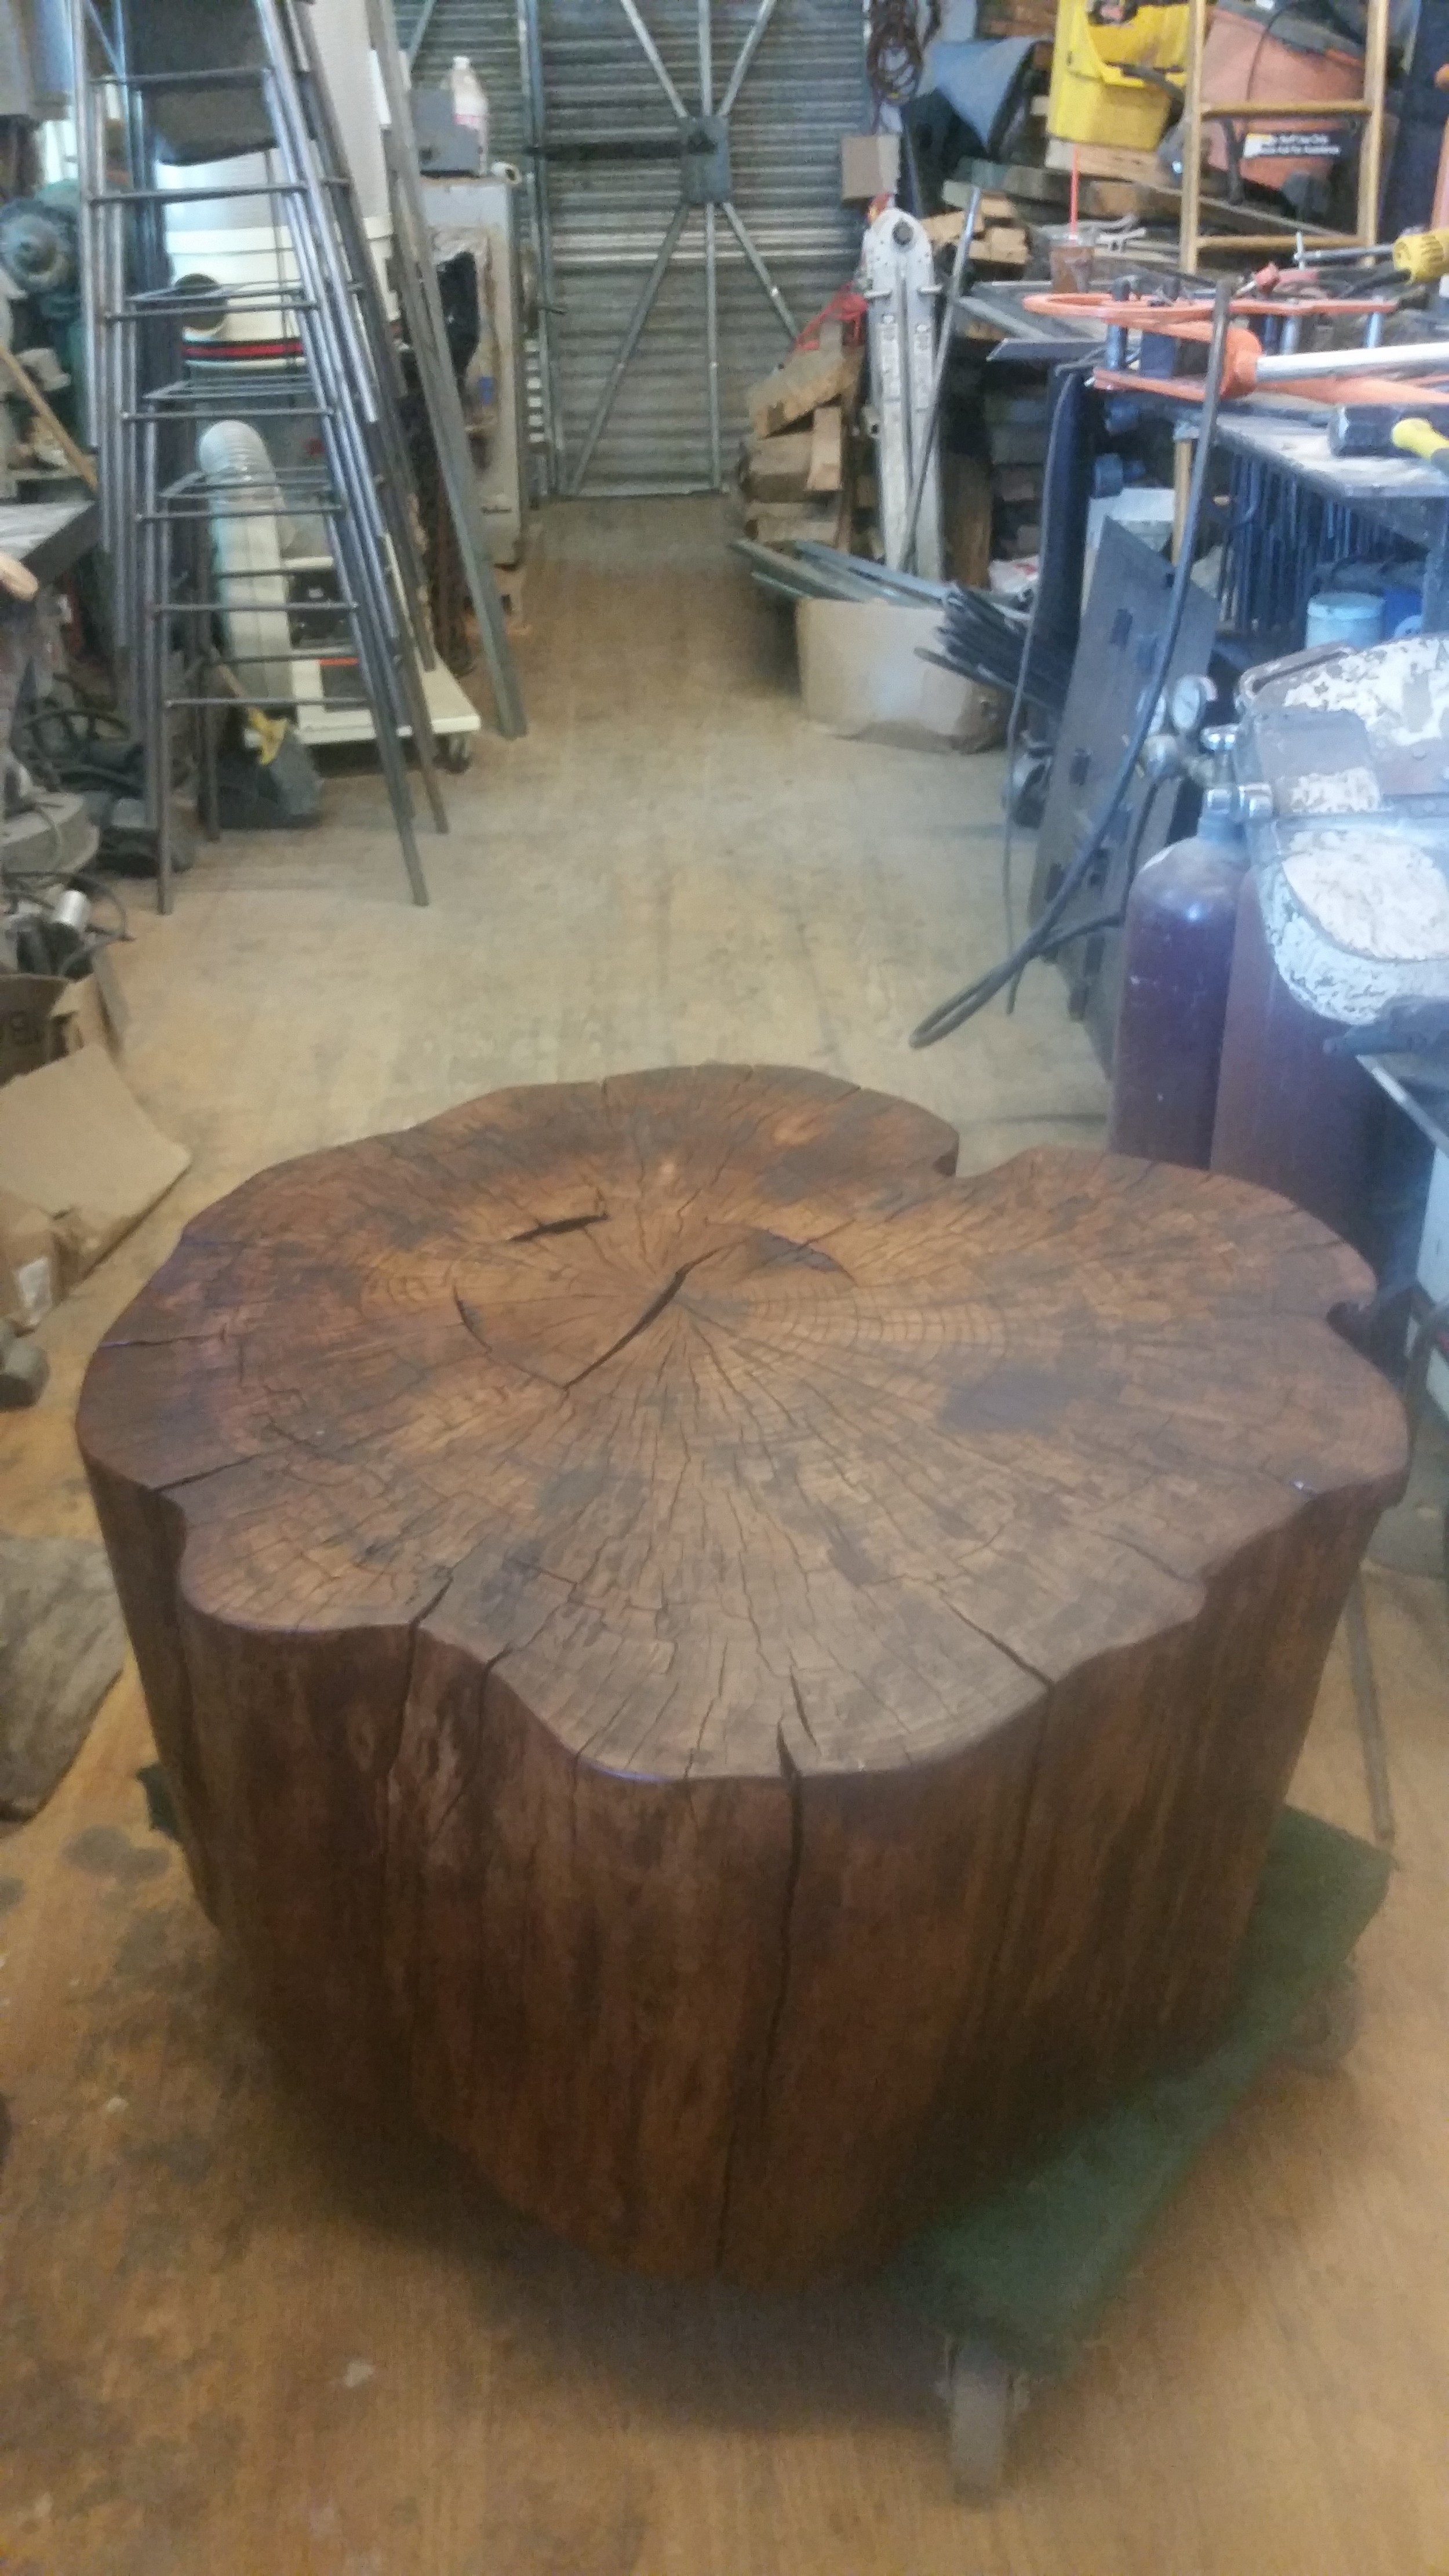 Stained Maple Stump Table.jpg